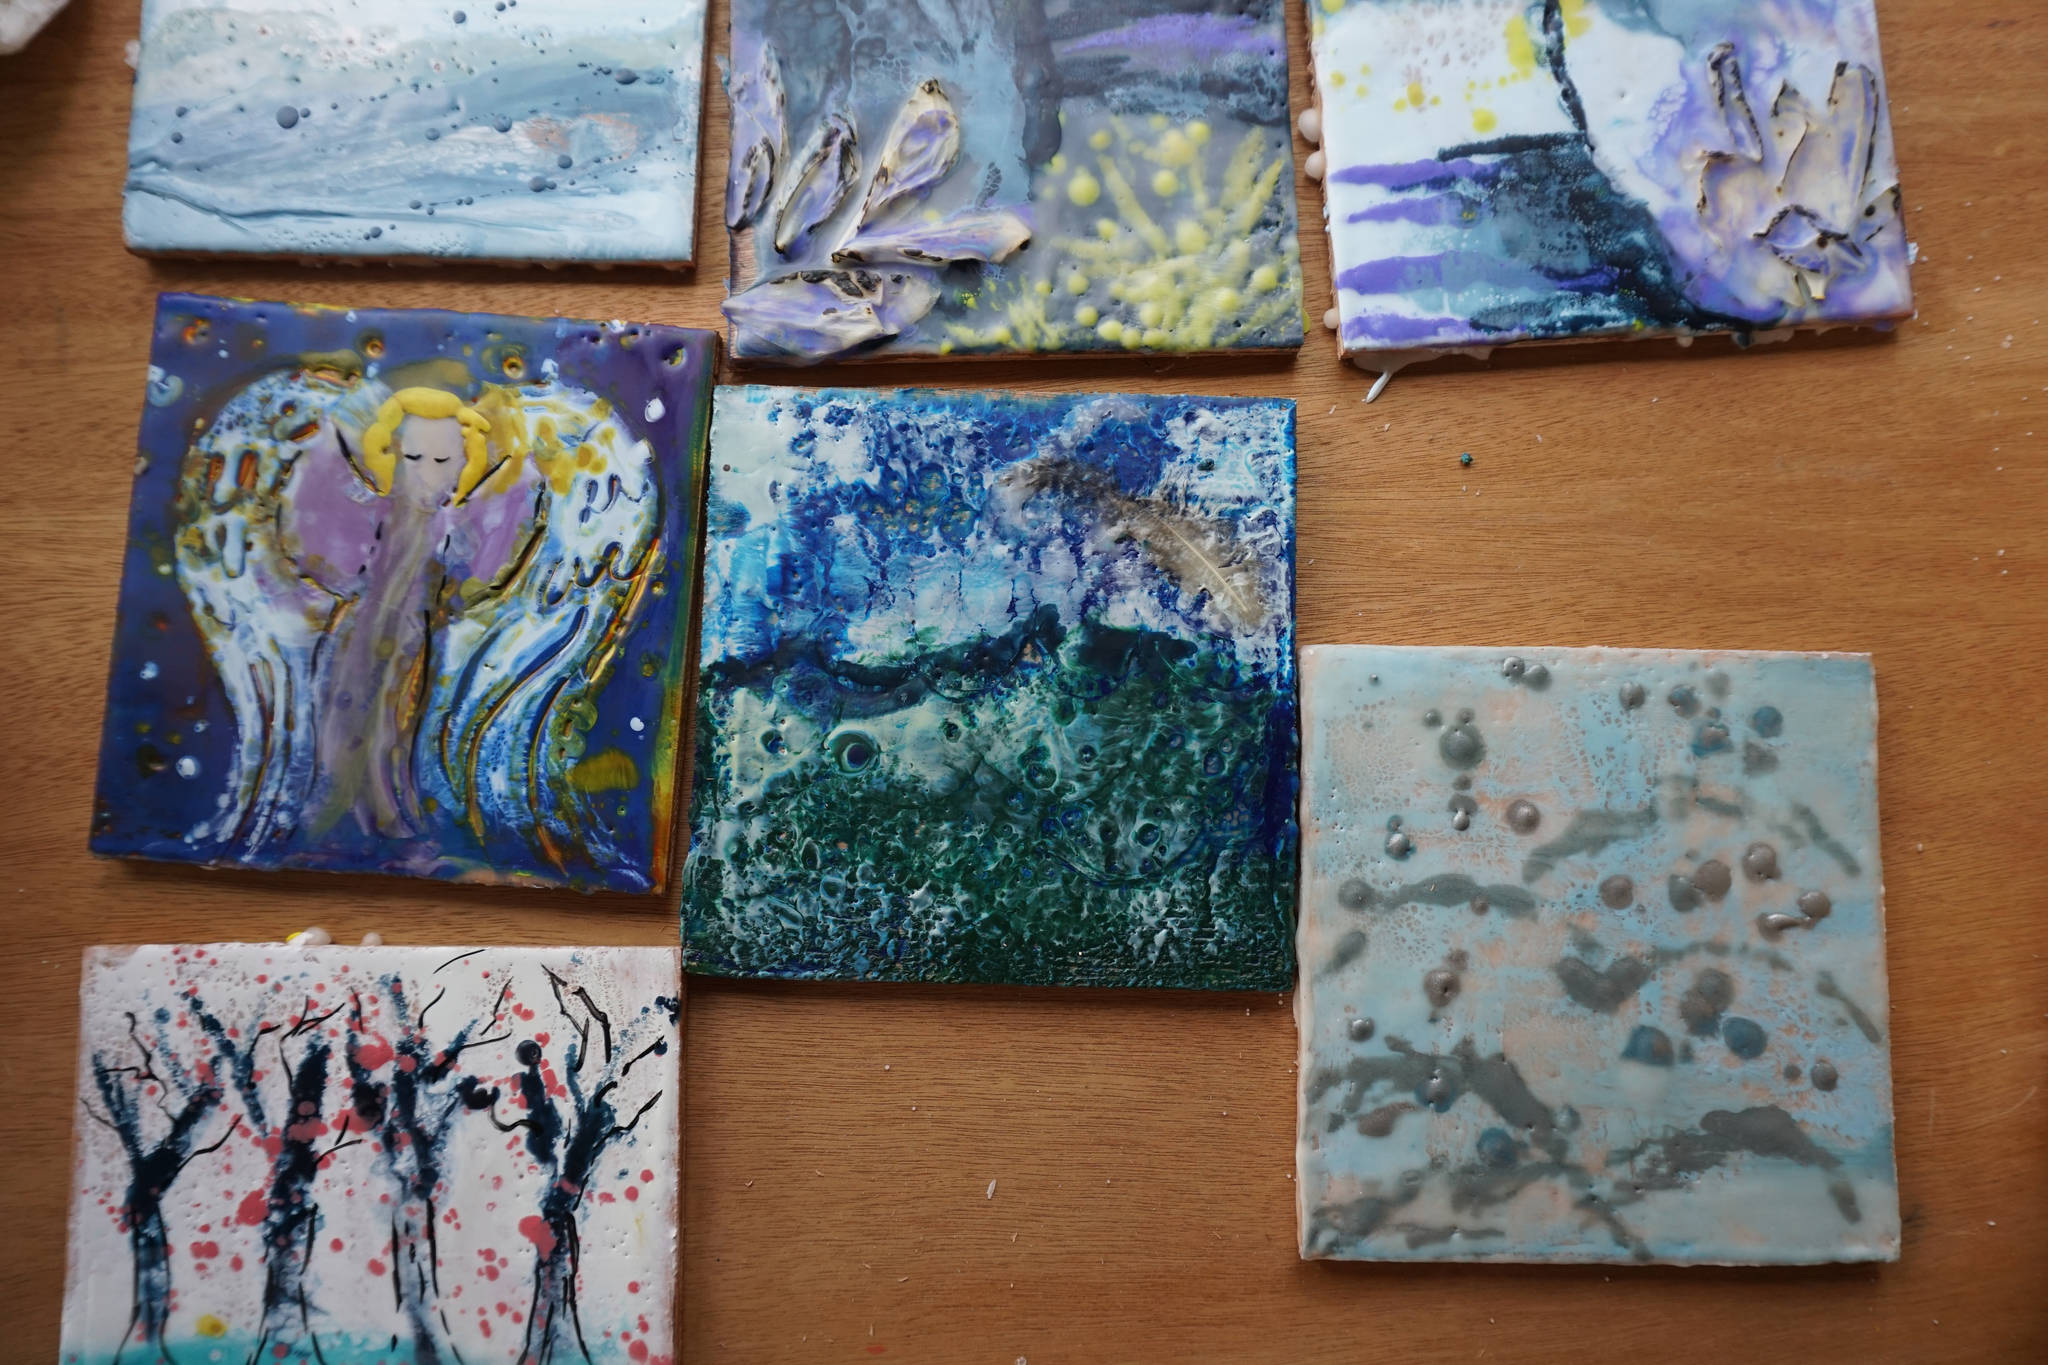 Some of the encaustic art created in Ann-Margret Wimmerstedts Wax. Wine & Wimmerstedt class held July 30, 2017 at Wimmerstedt’s home. (Photo by Michael Armstrong/Homer News)